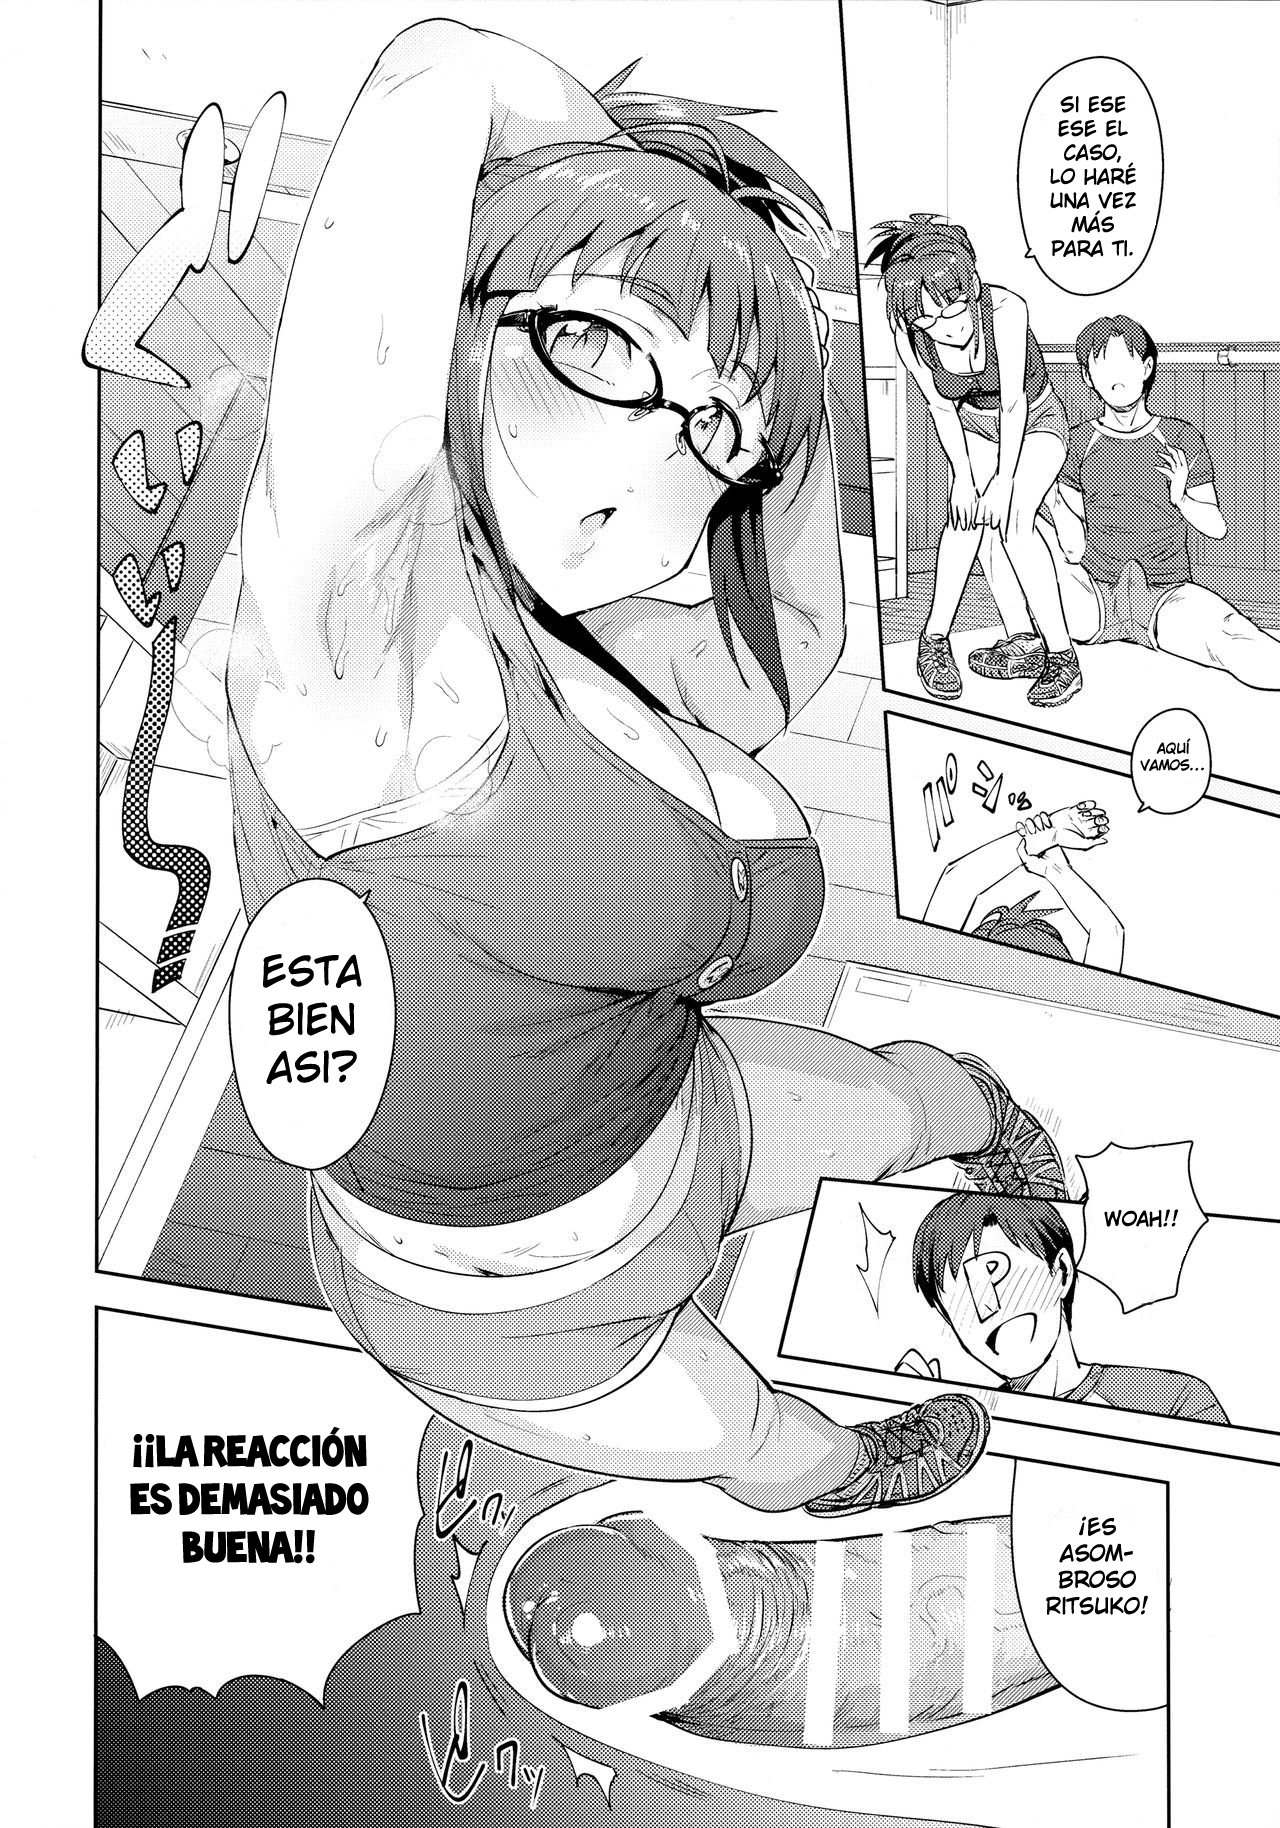 Stretching with Ritsuko - 6